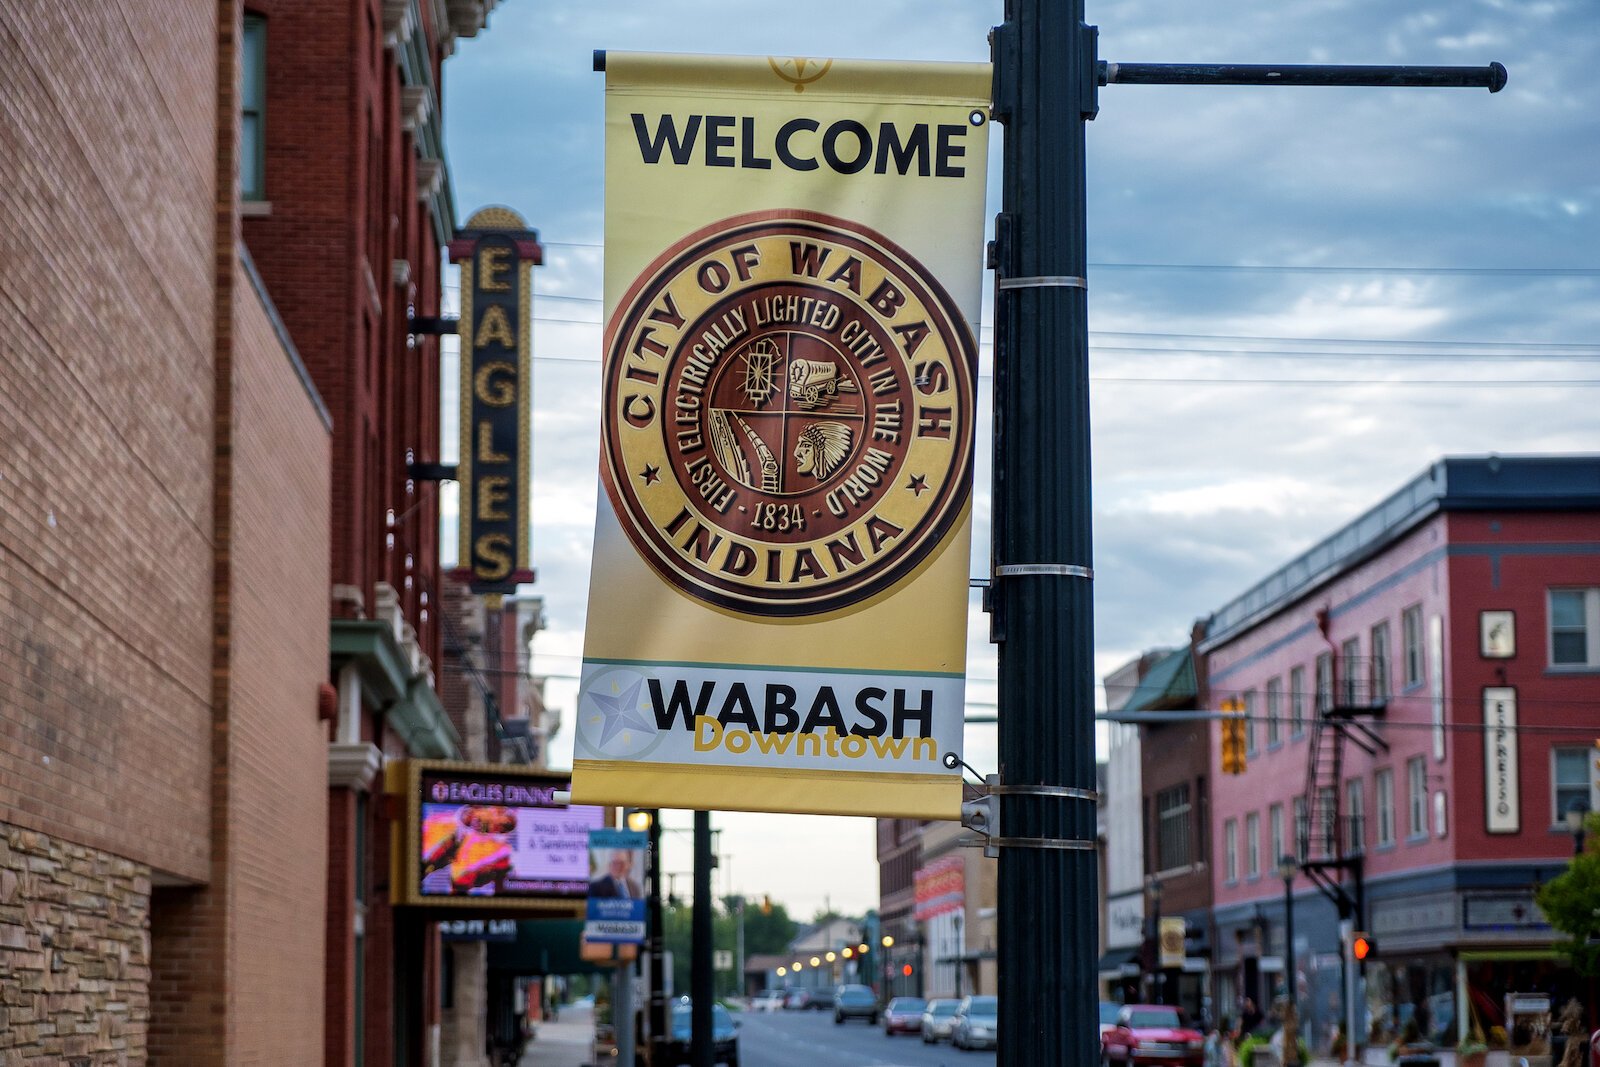 A view of Downtown Wabash.